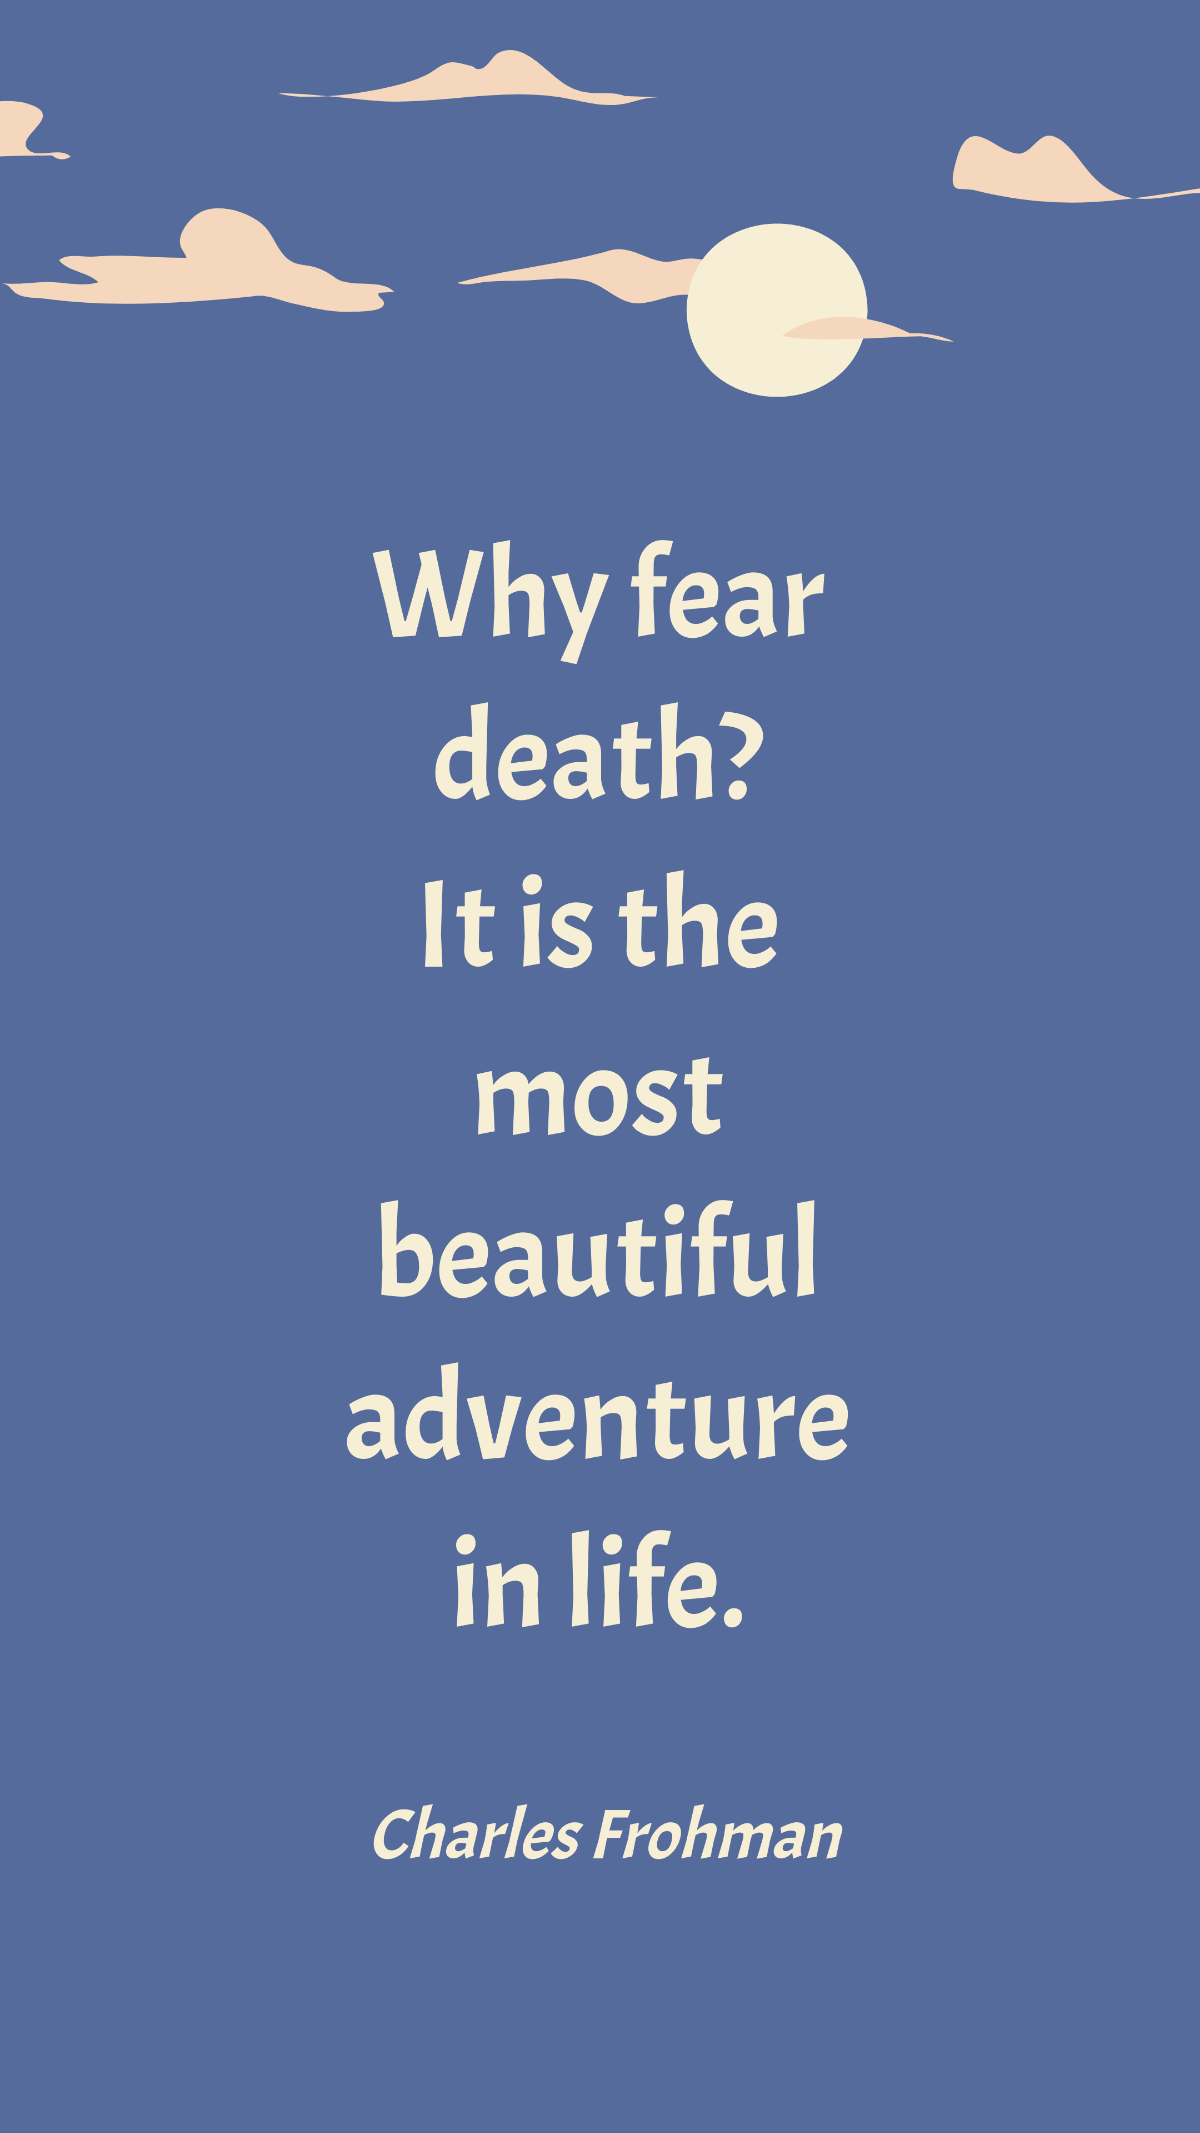 Charles Frohman - Why fear death? It is the most beautiful adventure in life.